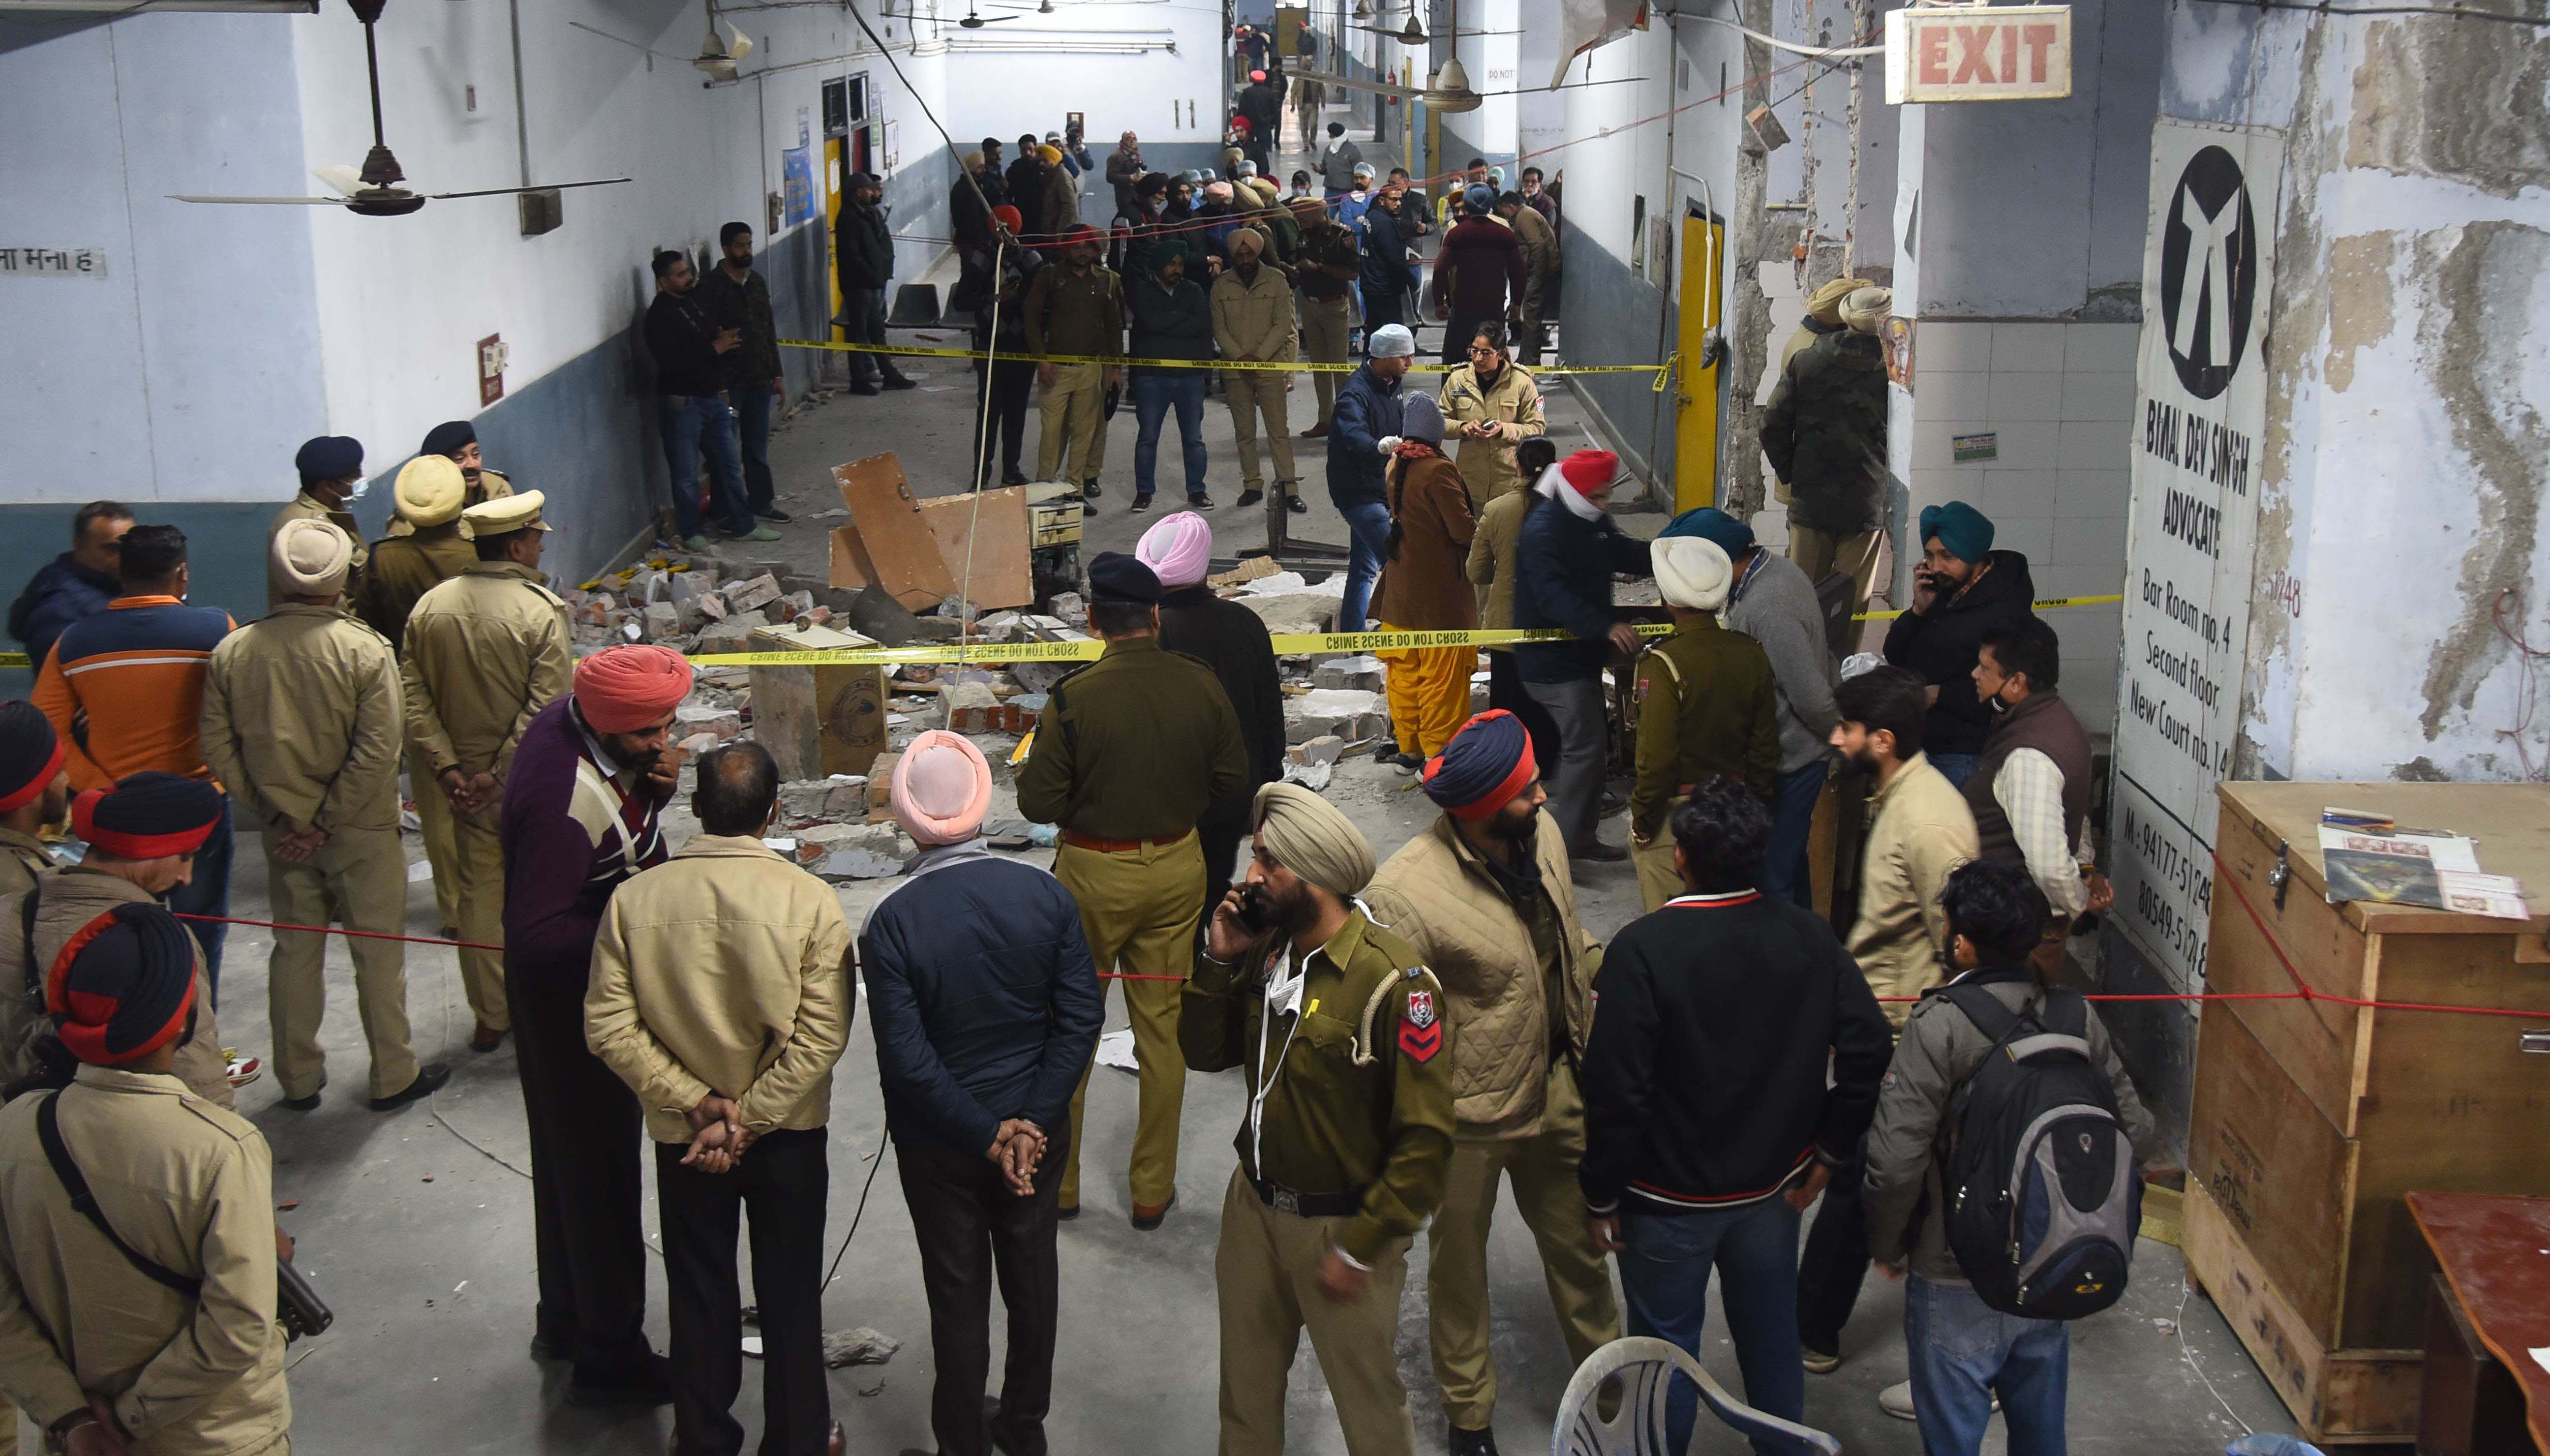 IEDs were meant for targeting trains, public places: Ludhiana blast accused